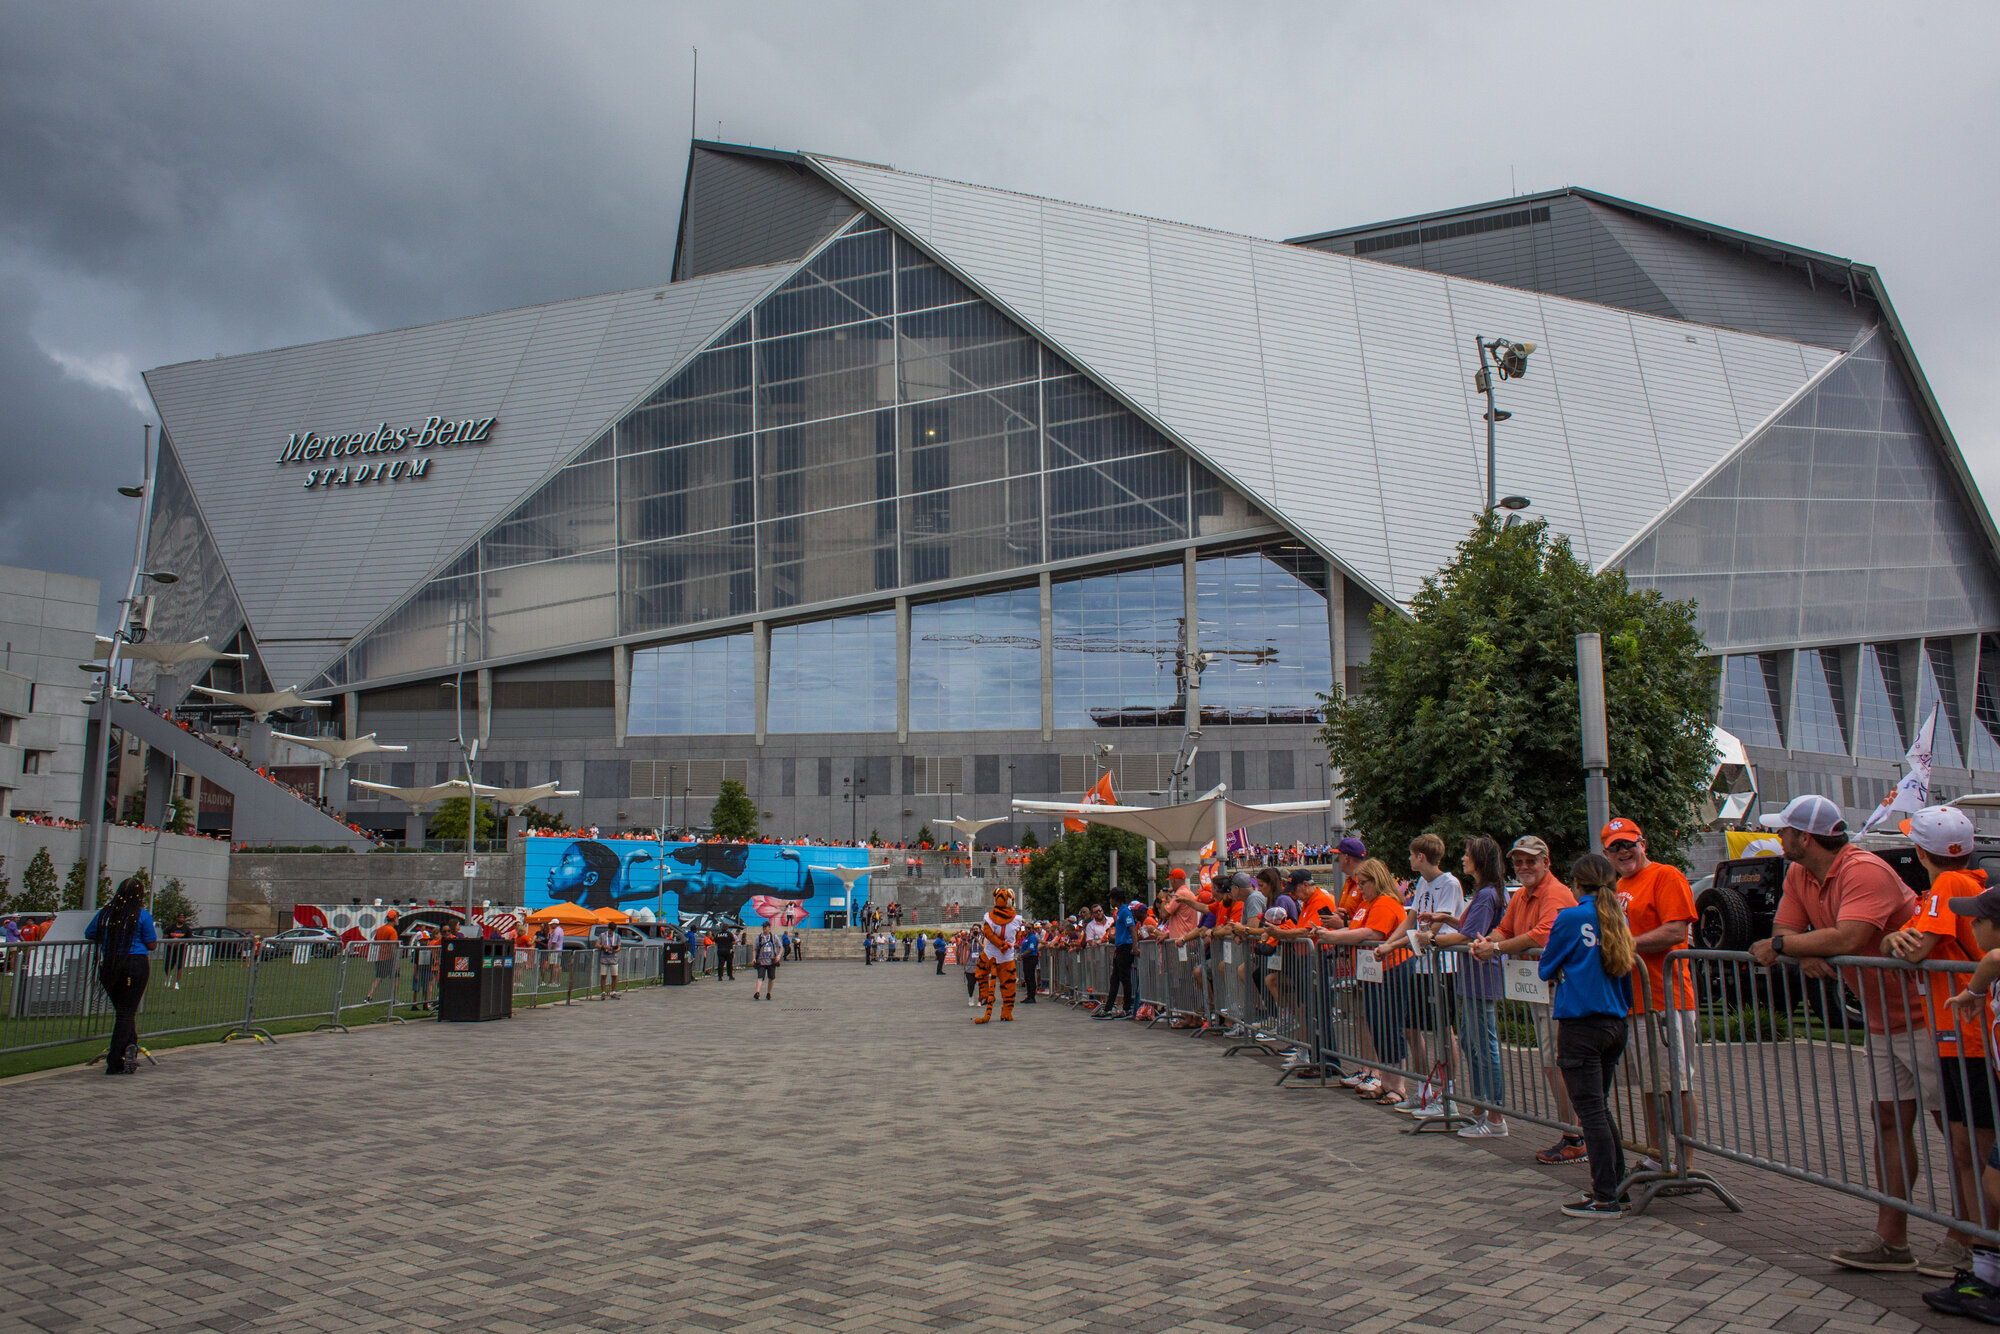 Mercedes-Benz Stadium will continue to serve as the home of the SEC football championship through 2031 after a deal that was announced on Thursday.